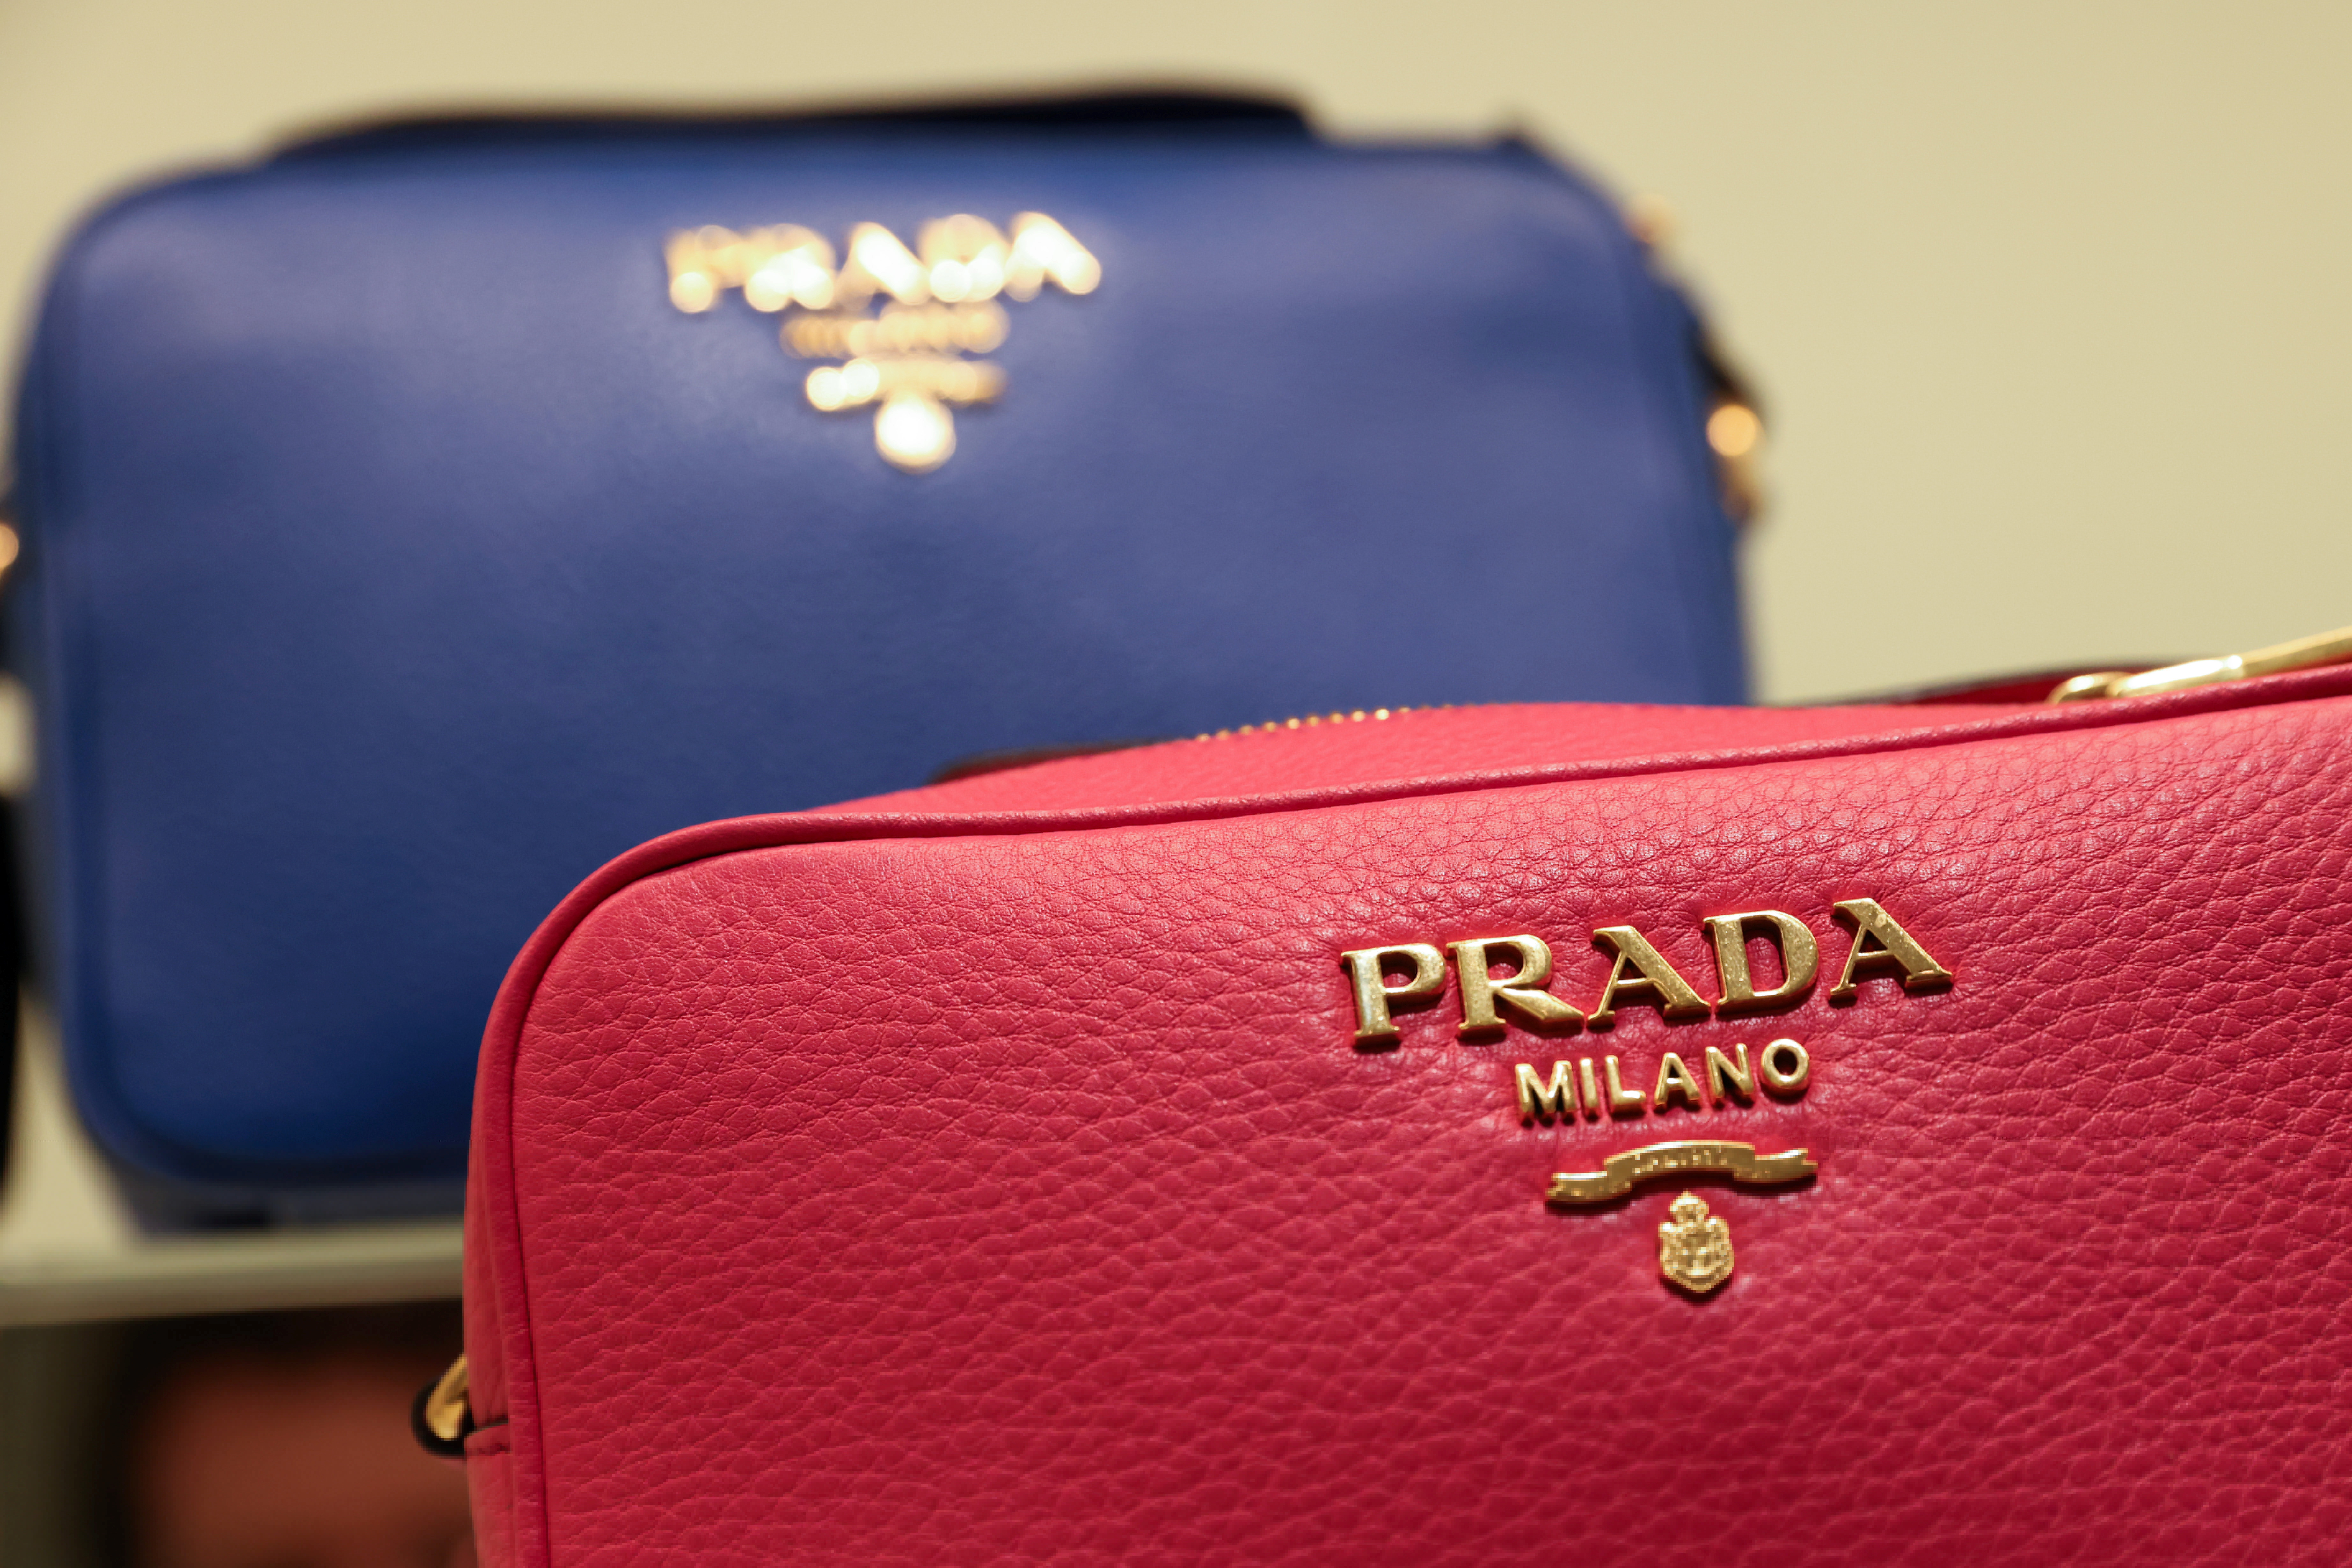 Prada at the Woodbury Common Premium Outlets in Central Valley, New York